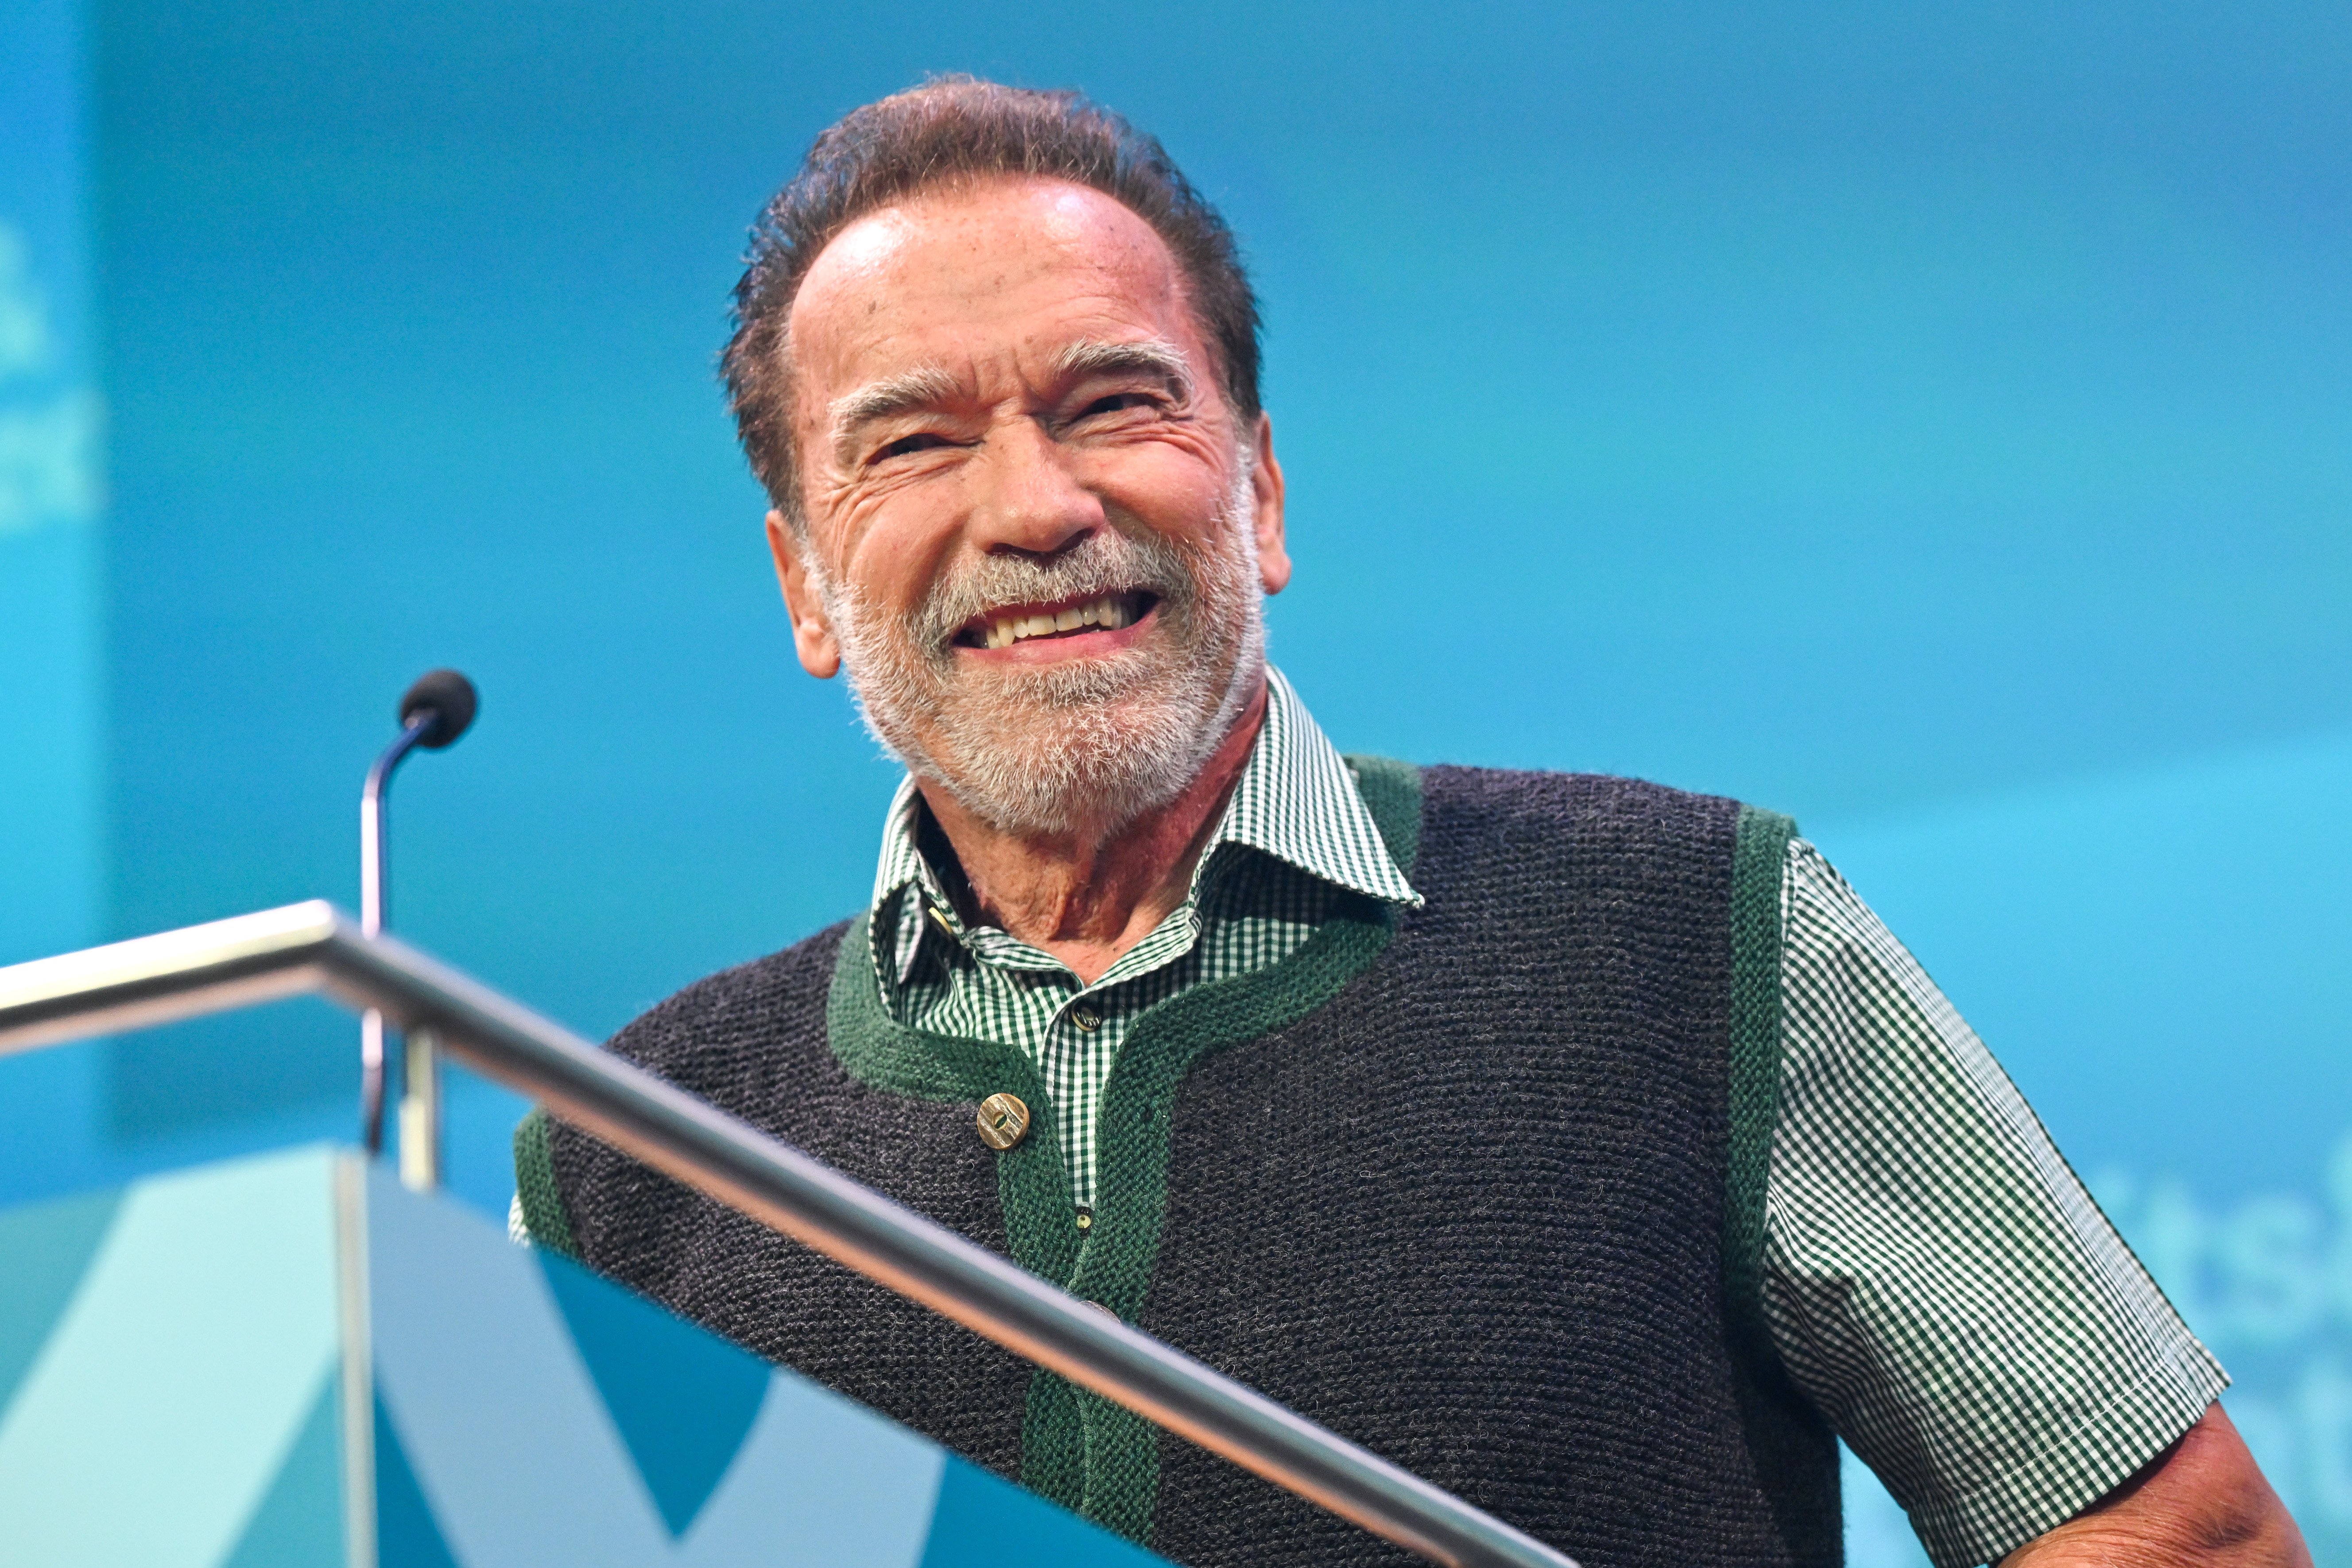 Arnold Schwarzenegger, actor and former governor of California, attends the Bits & Pretzels 2022 at ICM Munich on September 25, 2022, in Munich, Germany. | Source: Getty Images